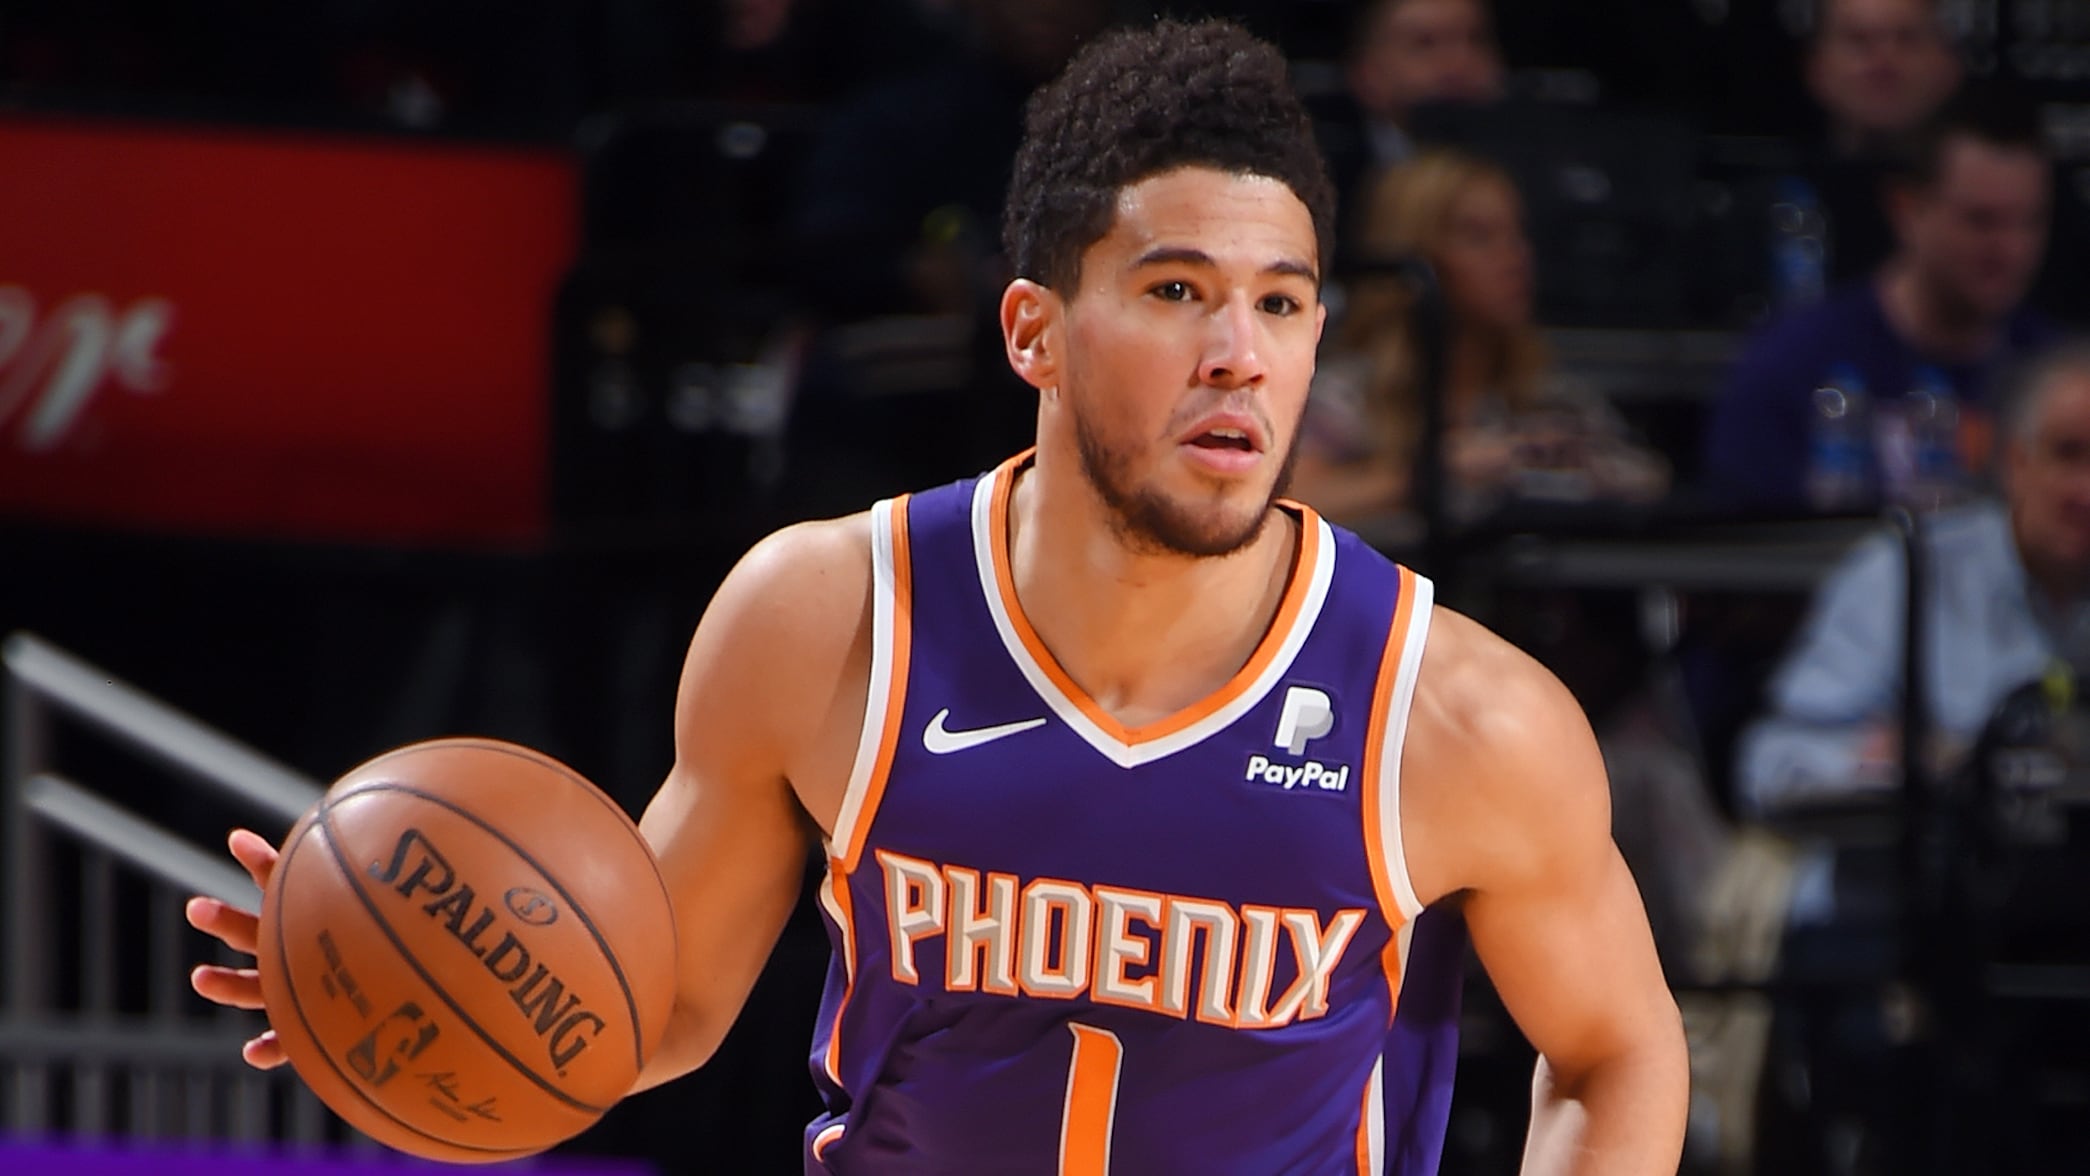 Devin Booker to miss the Spurs game